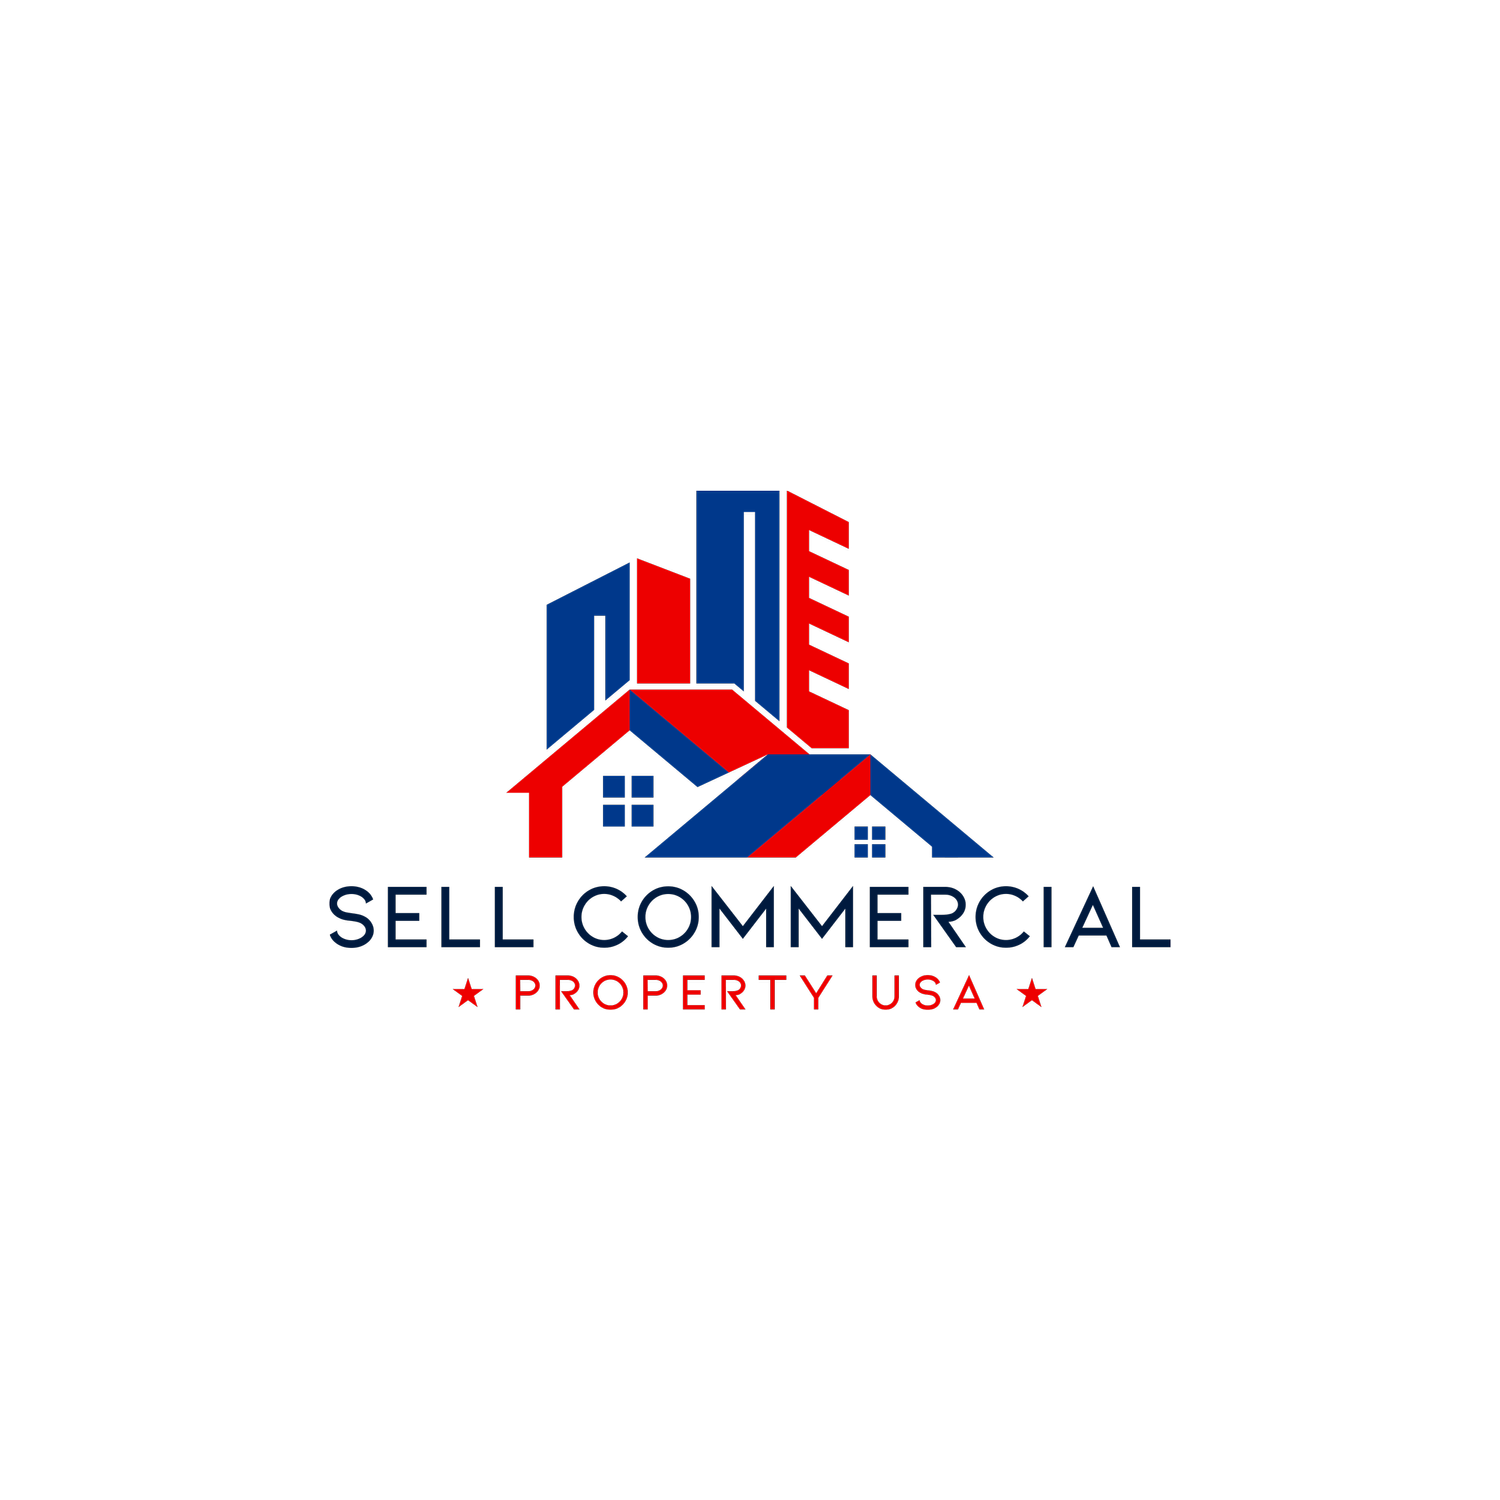 Sell Commercial Property Nationwide USA | 1 (800) 467-4077 | We Buy Commercial Property | Commercial Property for Sale USA | Cash for Commercial Properties | Commercial Property Buyers